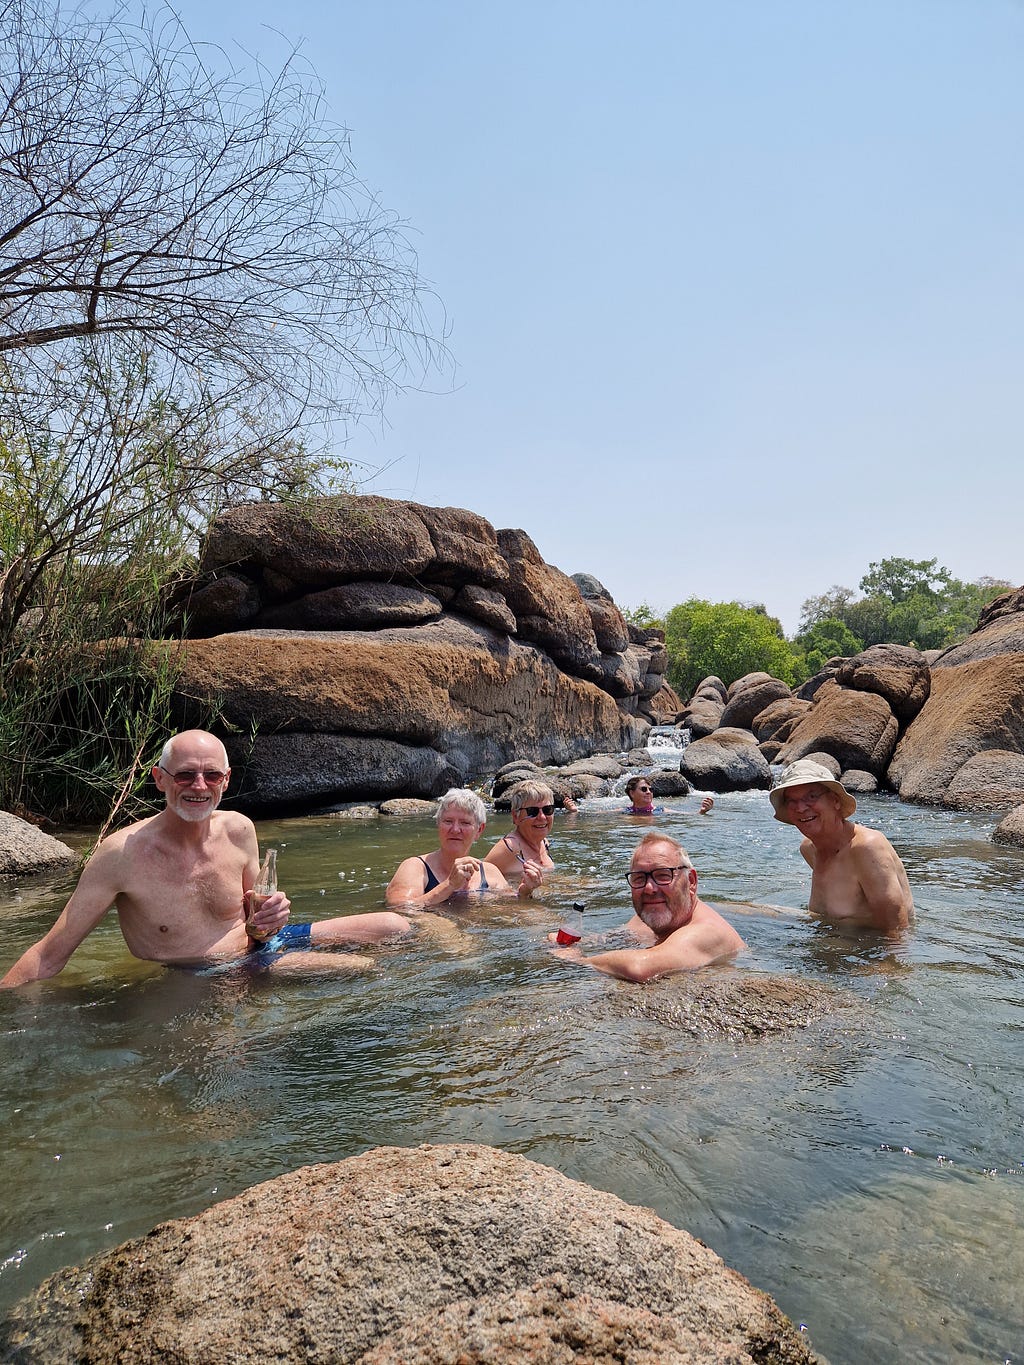 Adult humans in a river.